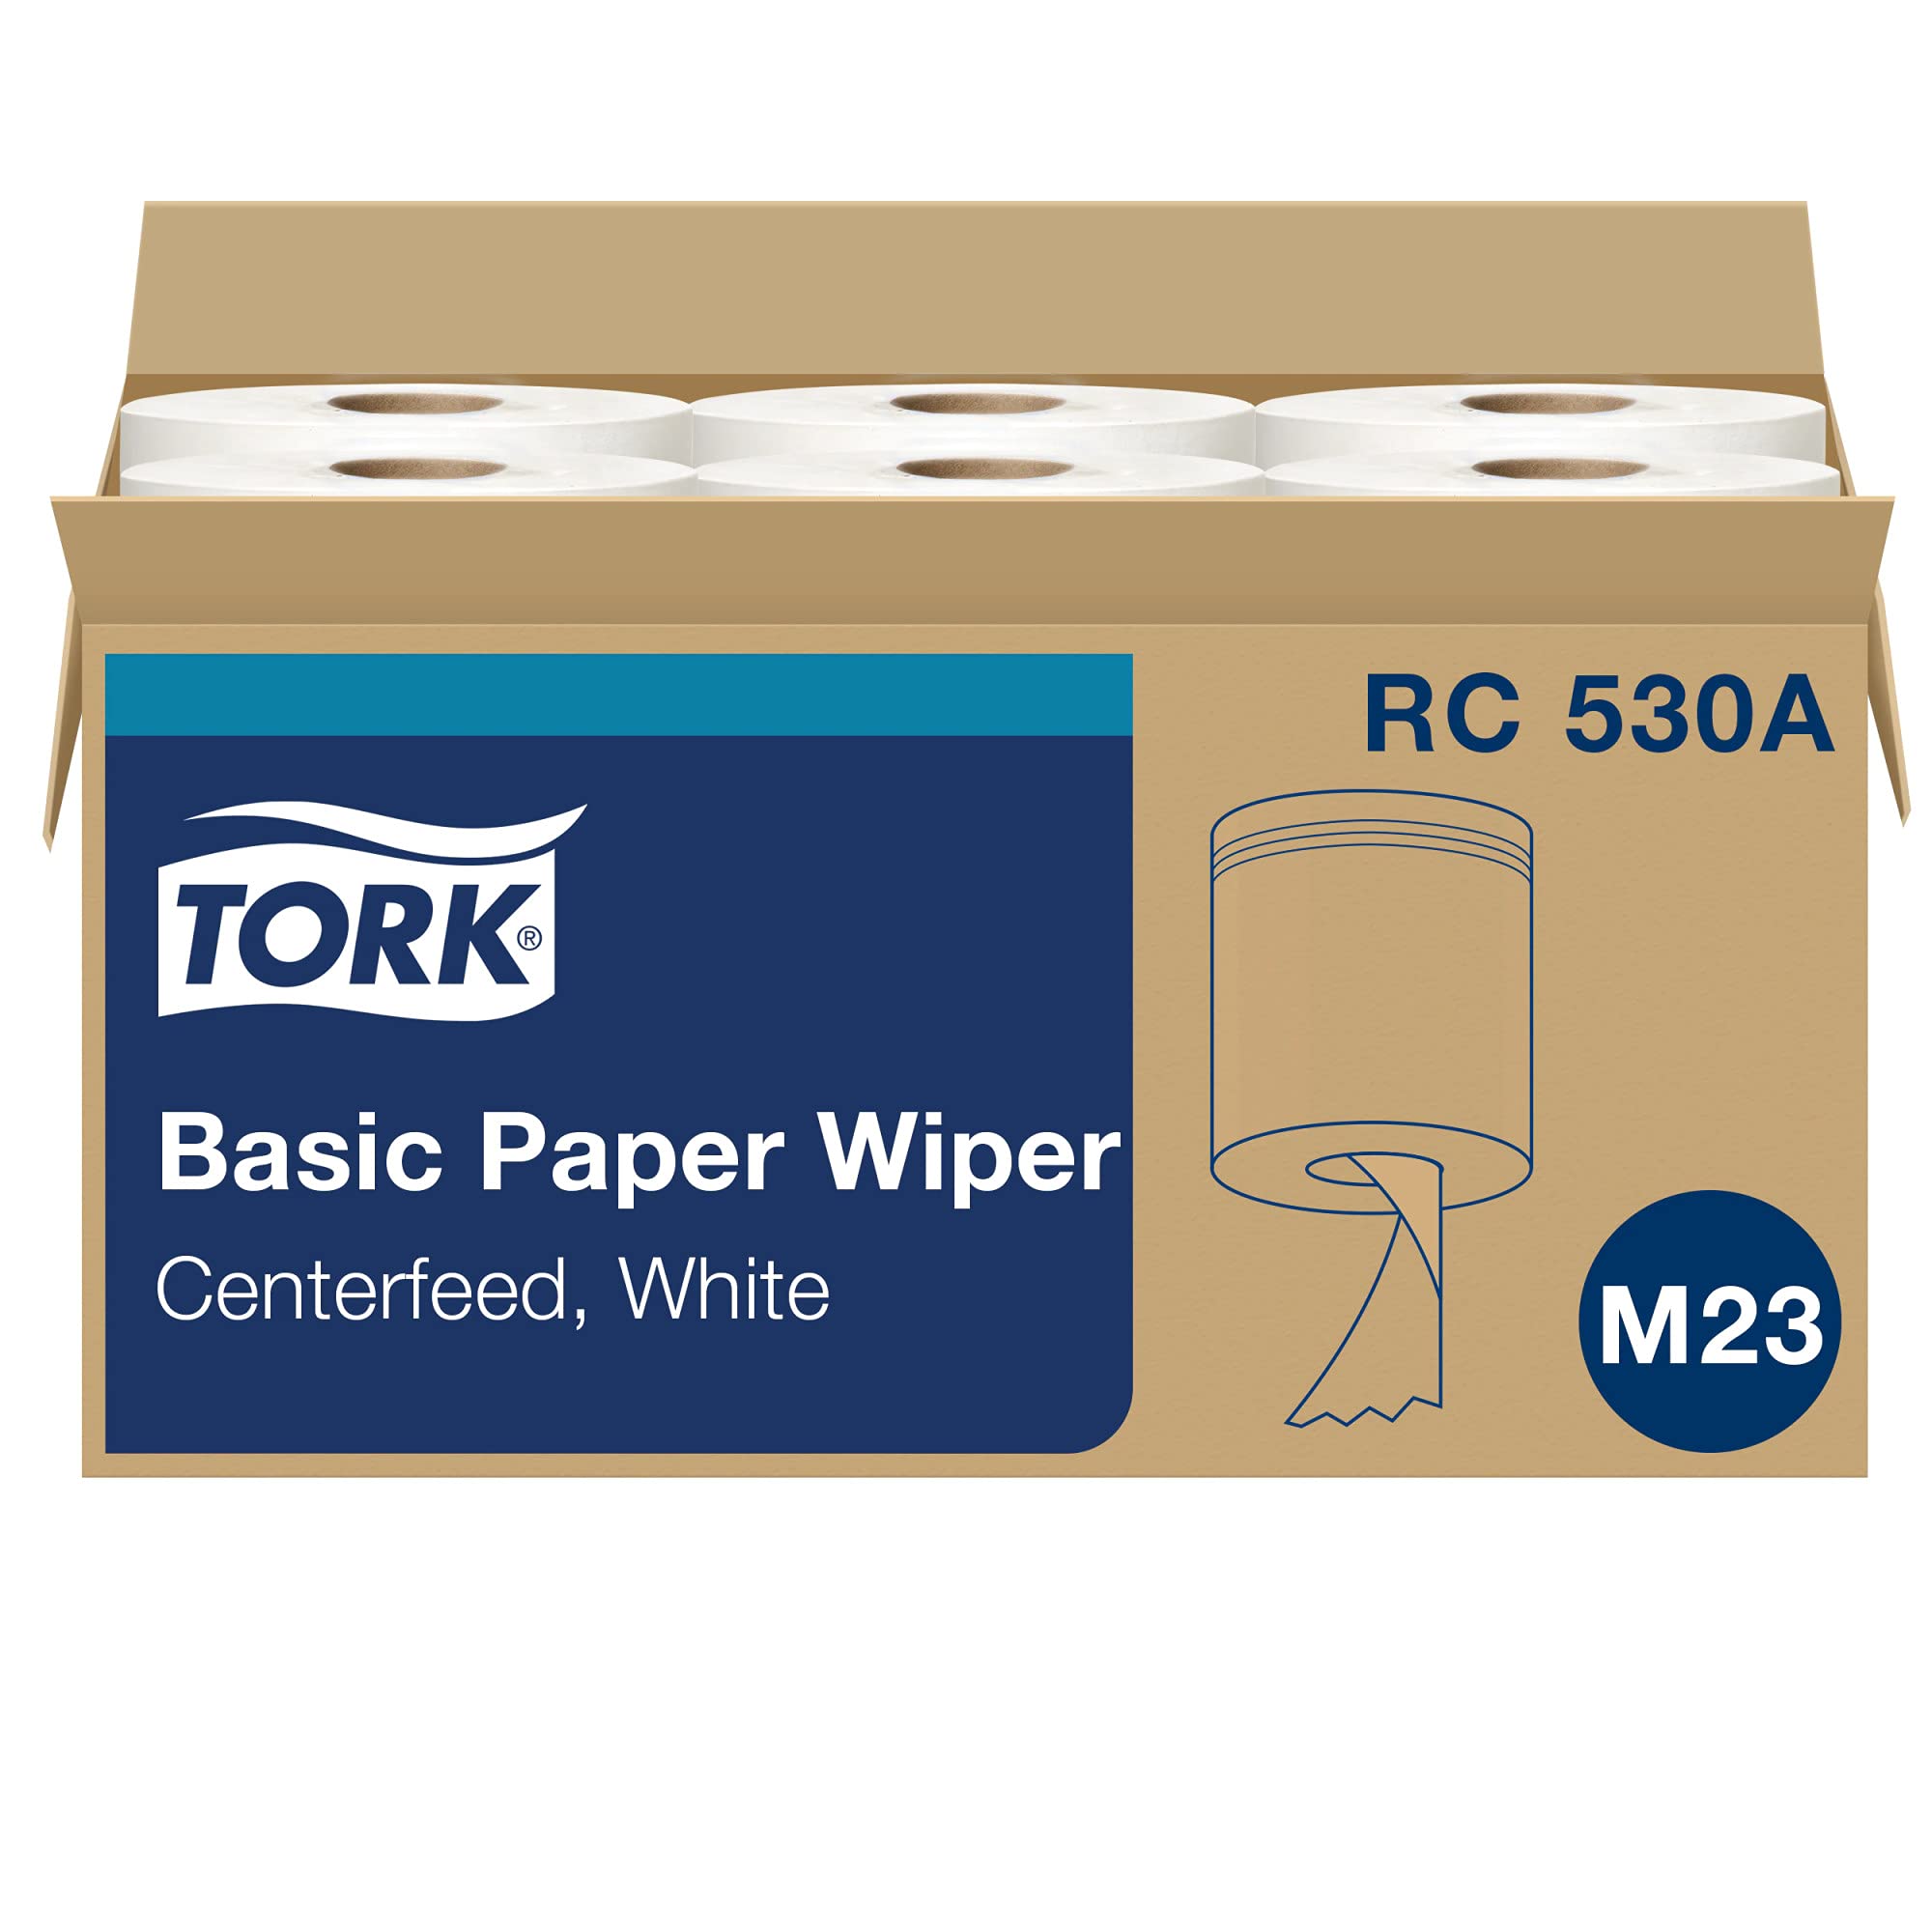 Tork Centerfeed Hand Towel White M23, One-at-a-time Dispensing, 6 x 530 Towels, RC530